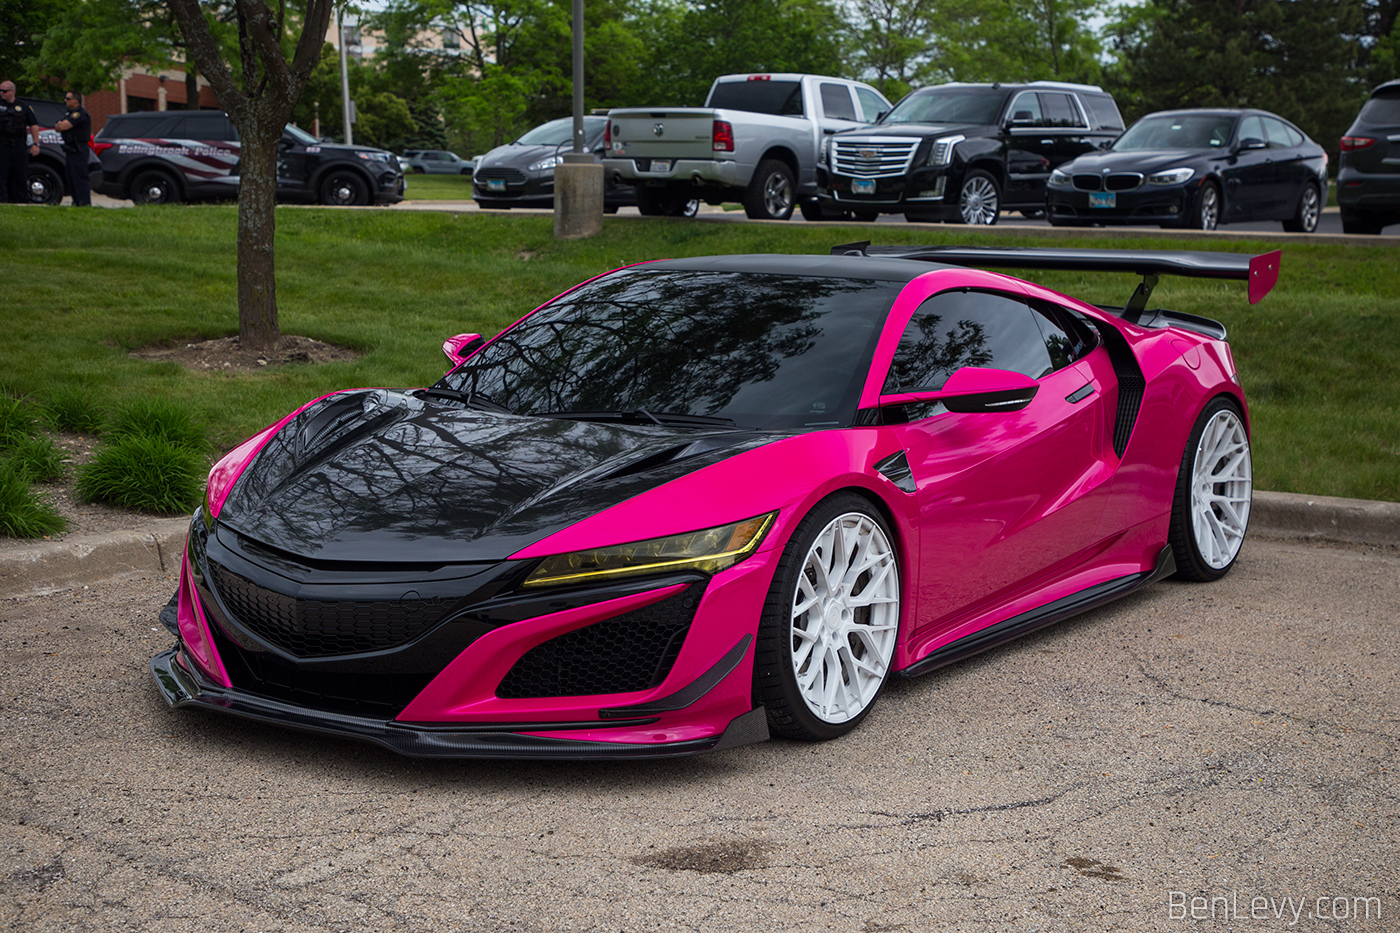 Pink Acura NSX at car show in Bolingbrook, IL